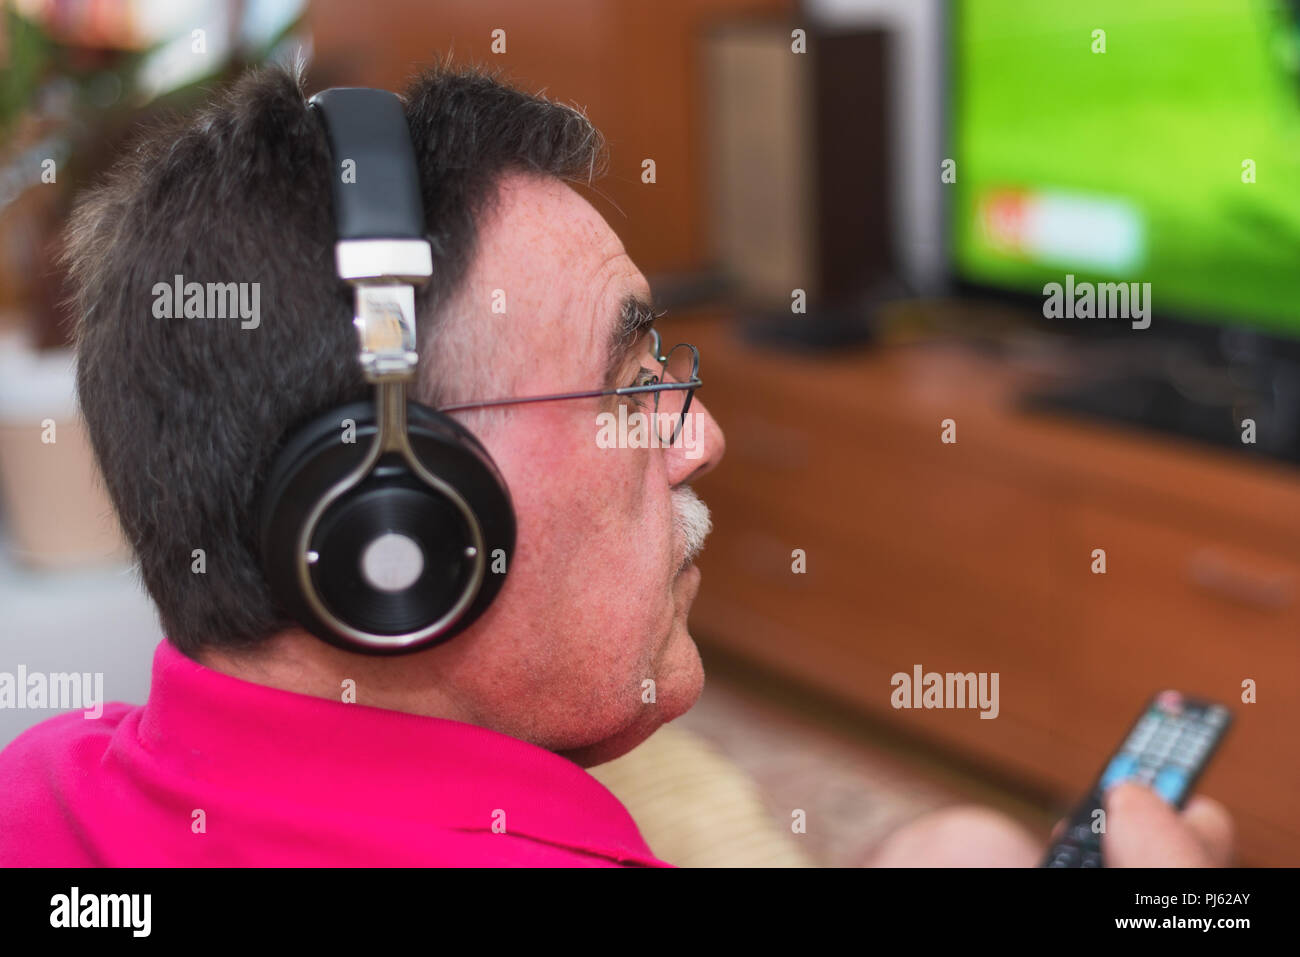 Back view of senior man with headphones watching tv holding remote control Stock Photo